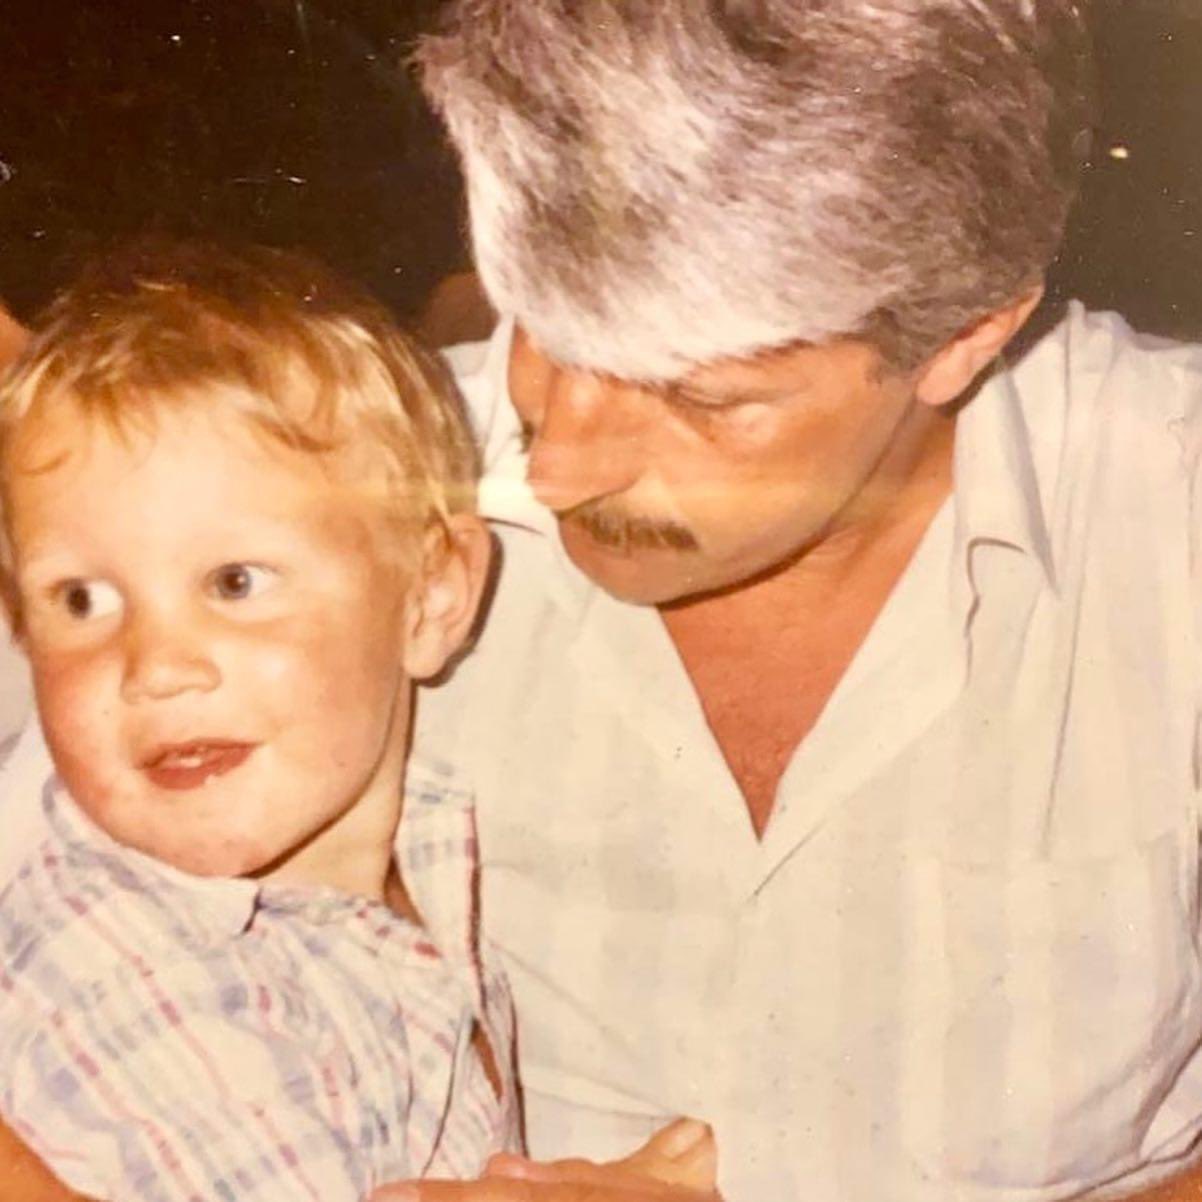 An old picture of Matt smith with his late-father David Smith